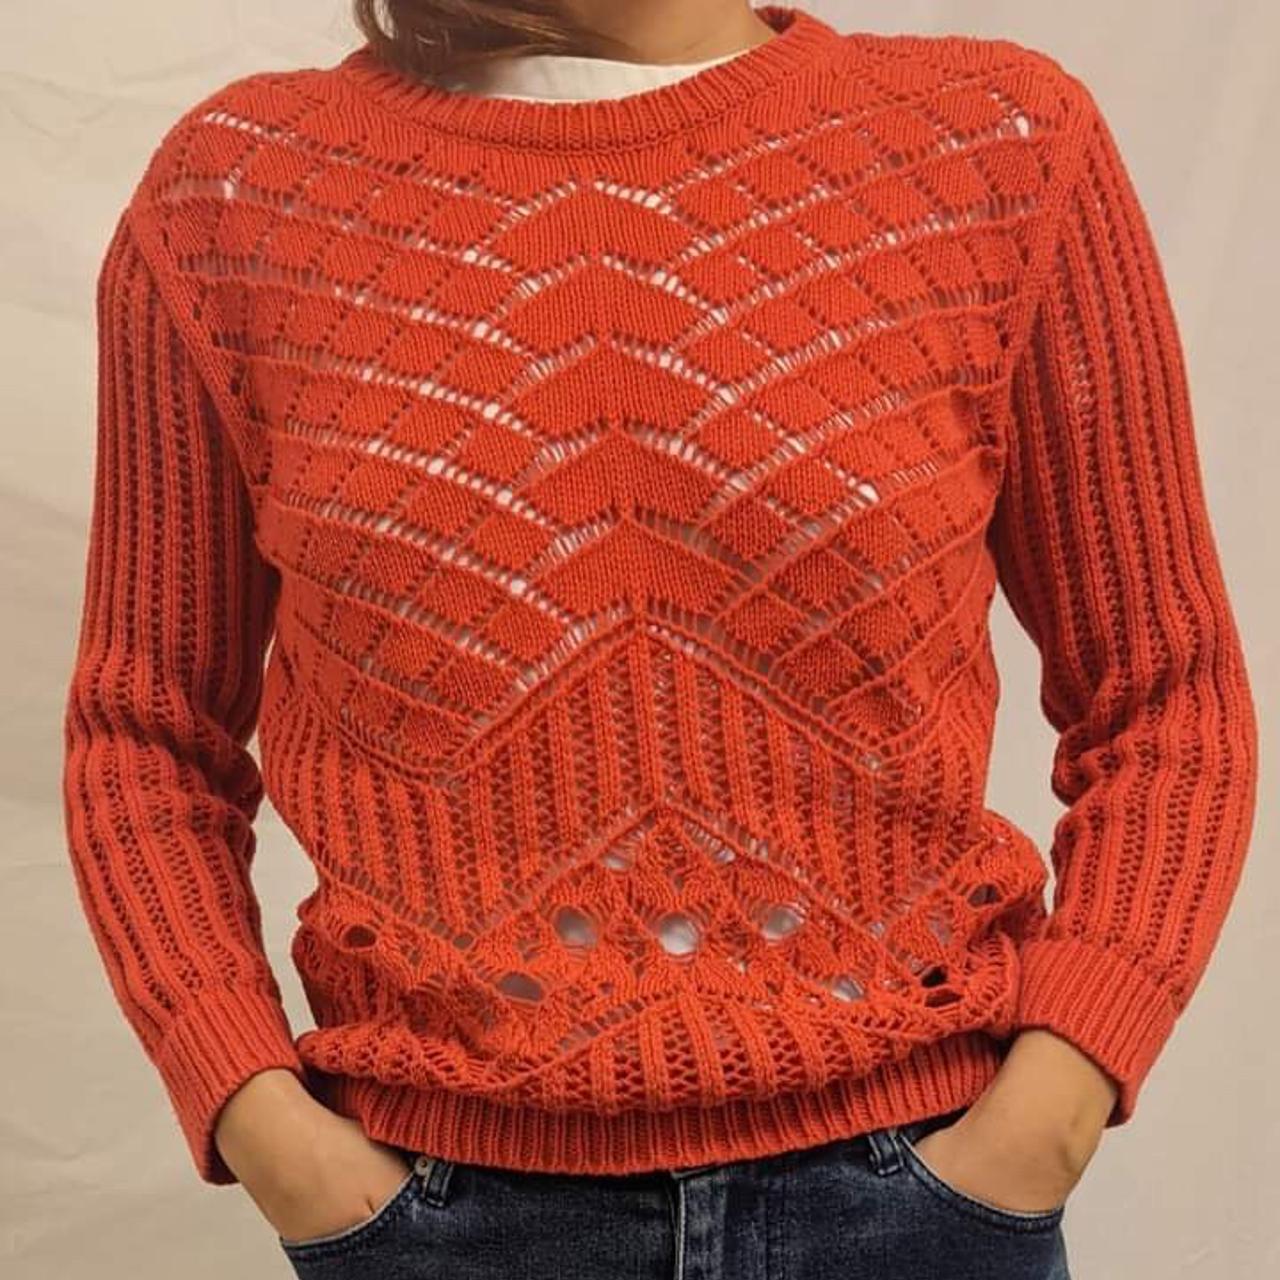 Urban Outfitters Women's Jumper